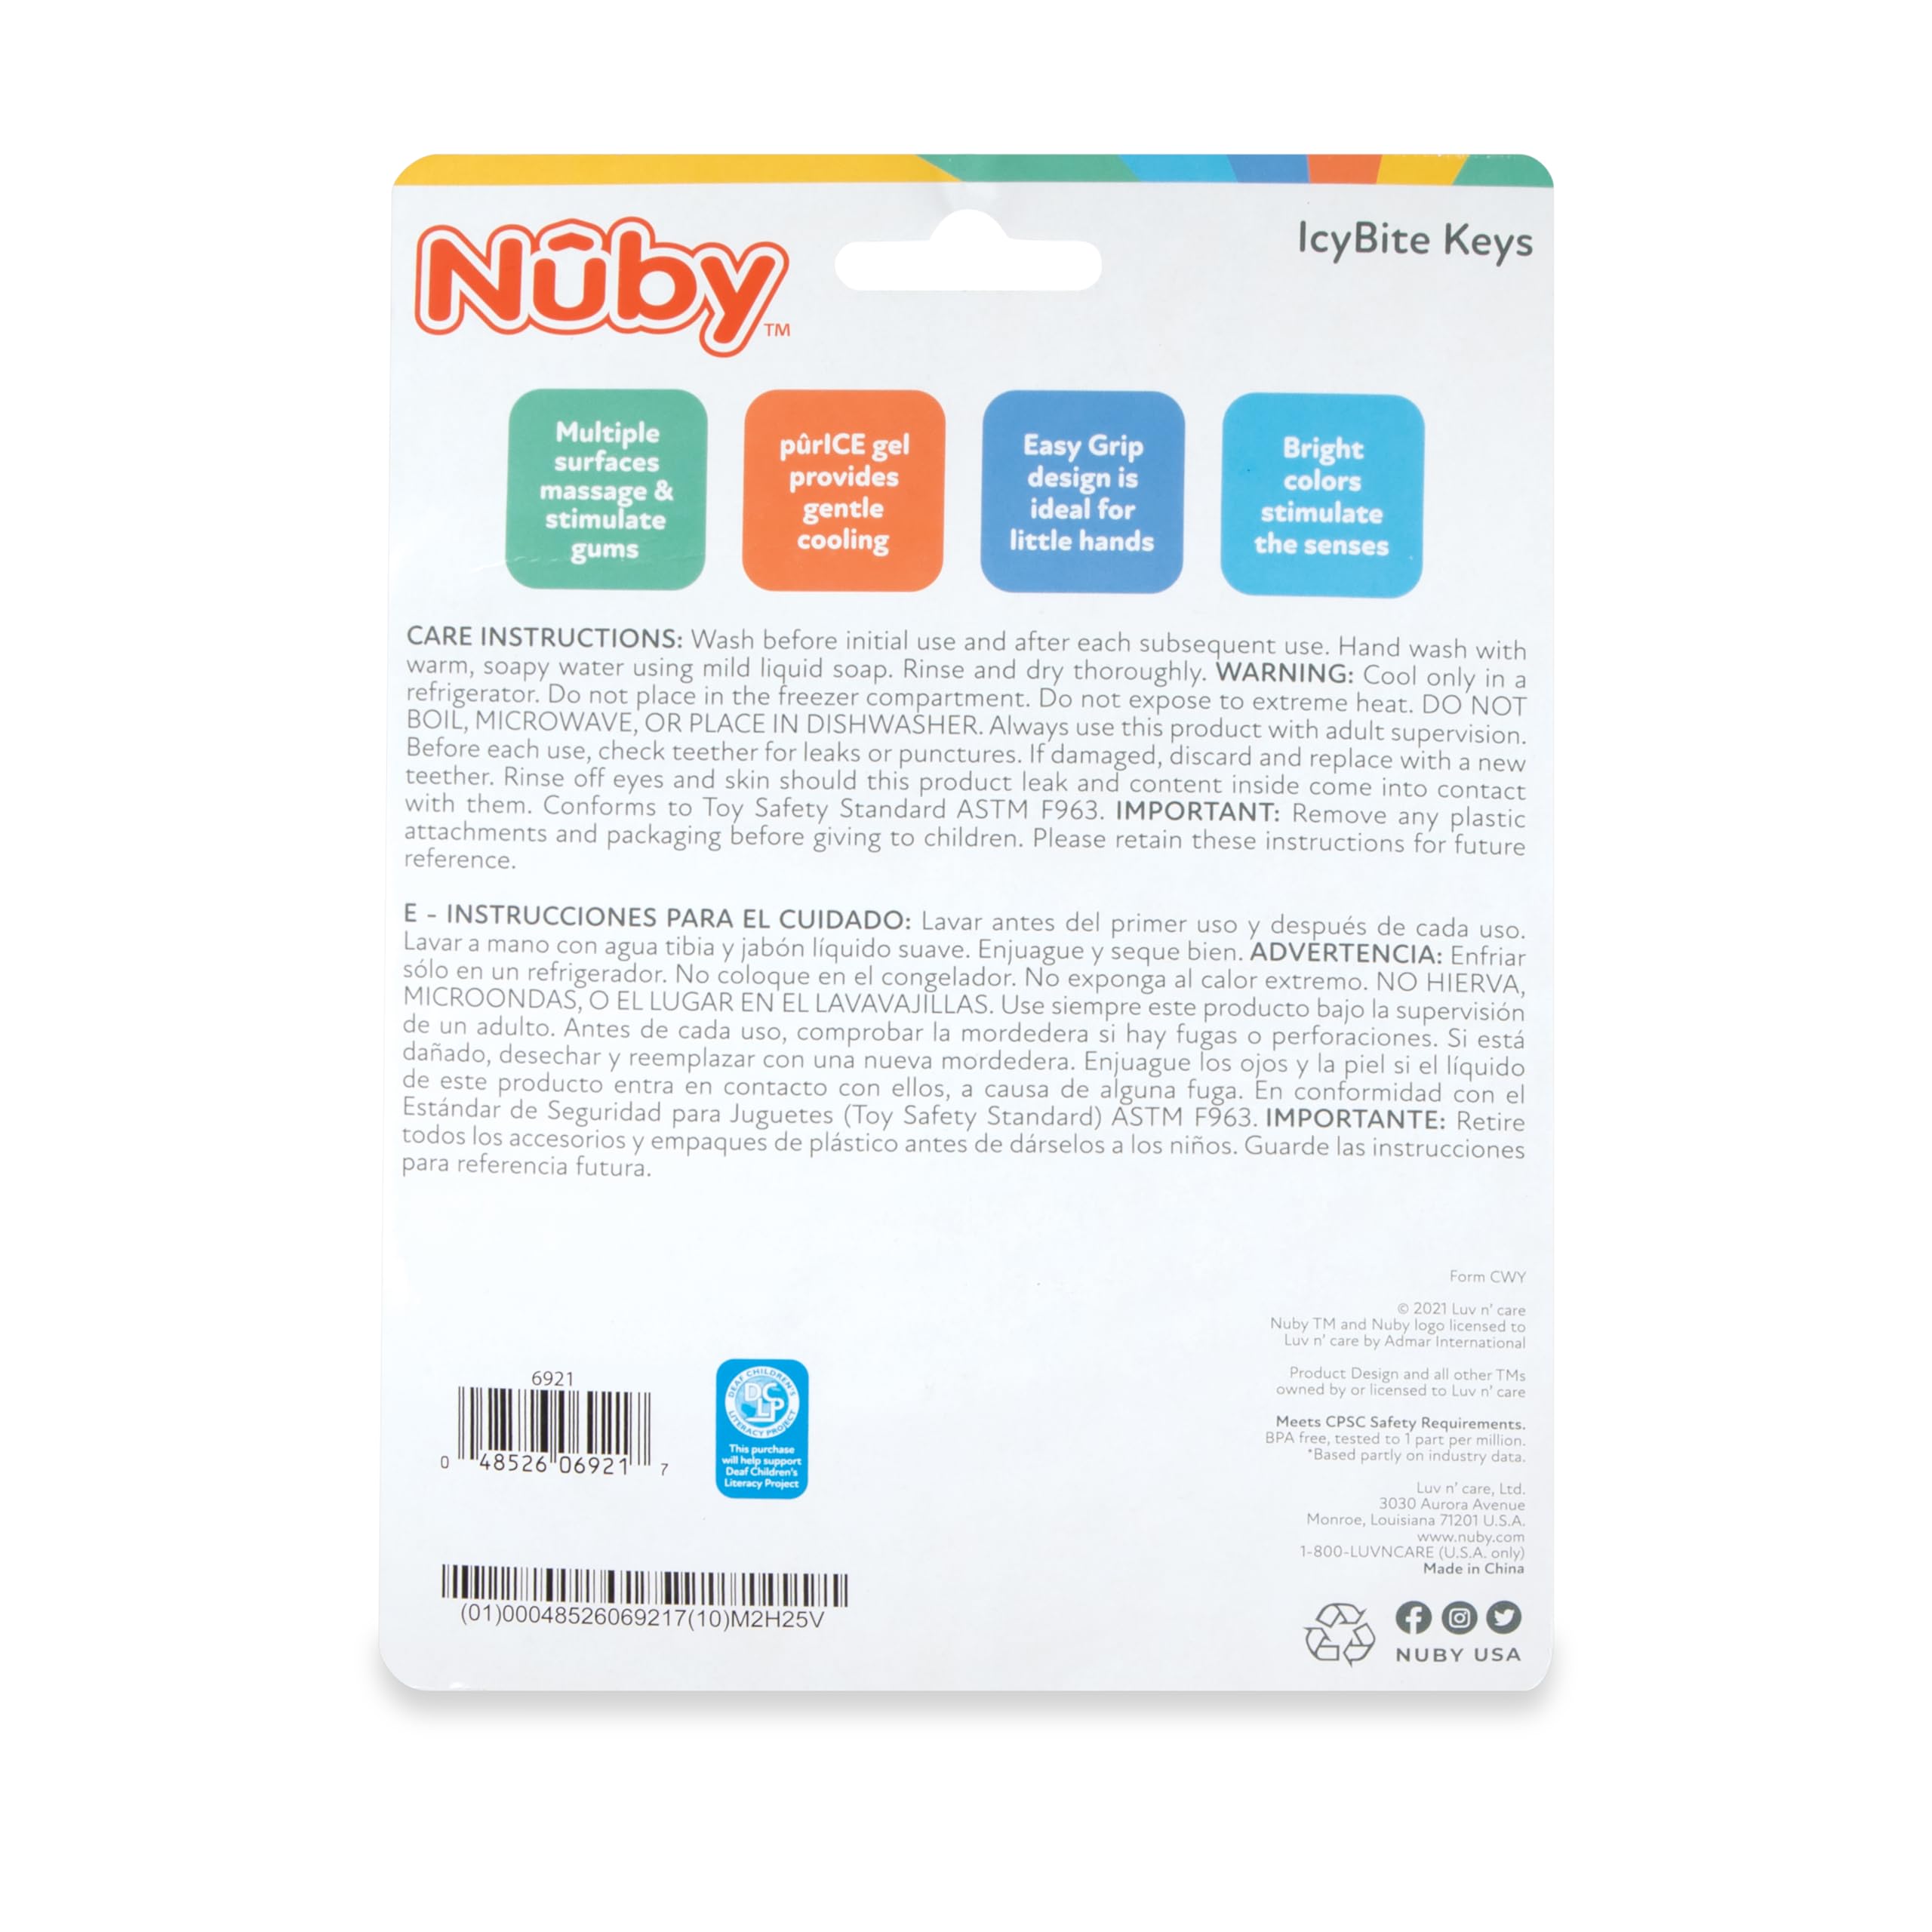 Nuby IcyBite Textured and Soothing Teether for Baby, Multicolor Keys - image 5 of 5